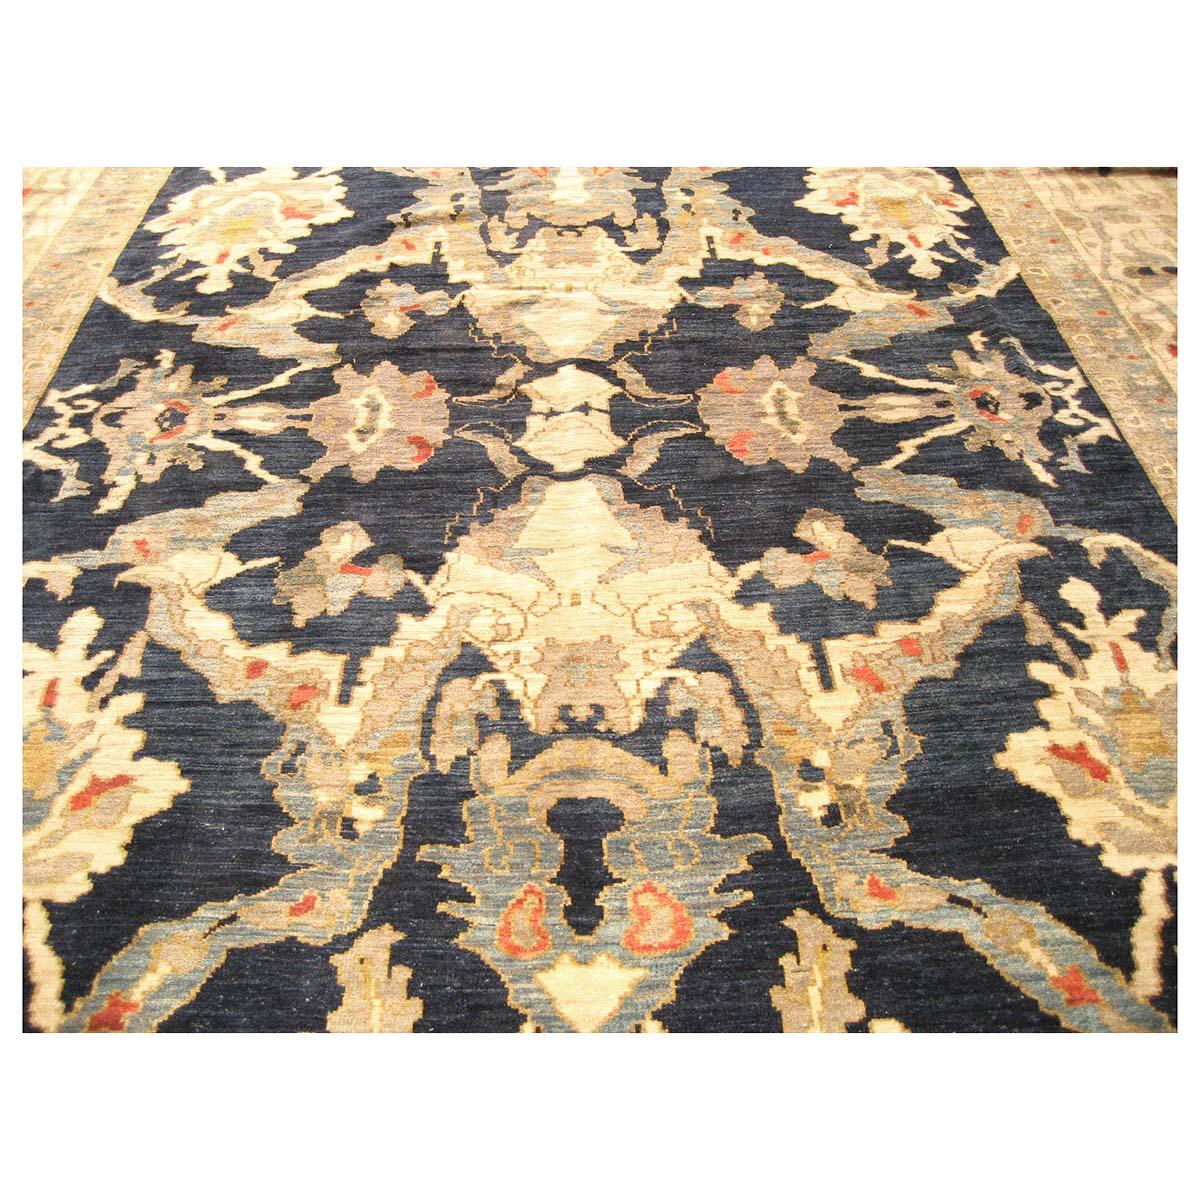 21st Century Persian Sultanabad 12x16 Navy Blue & Ivory Handmade Area Rug In Good Condition For Sale In Houston, TX